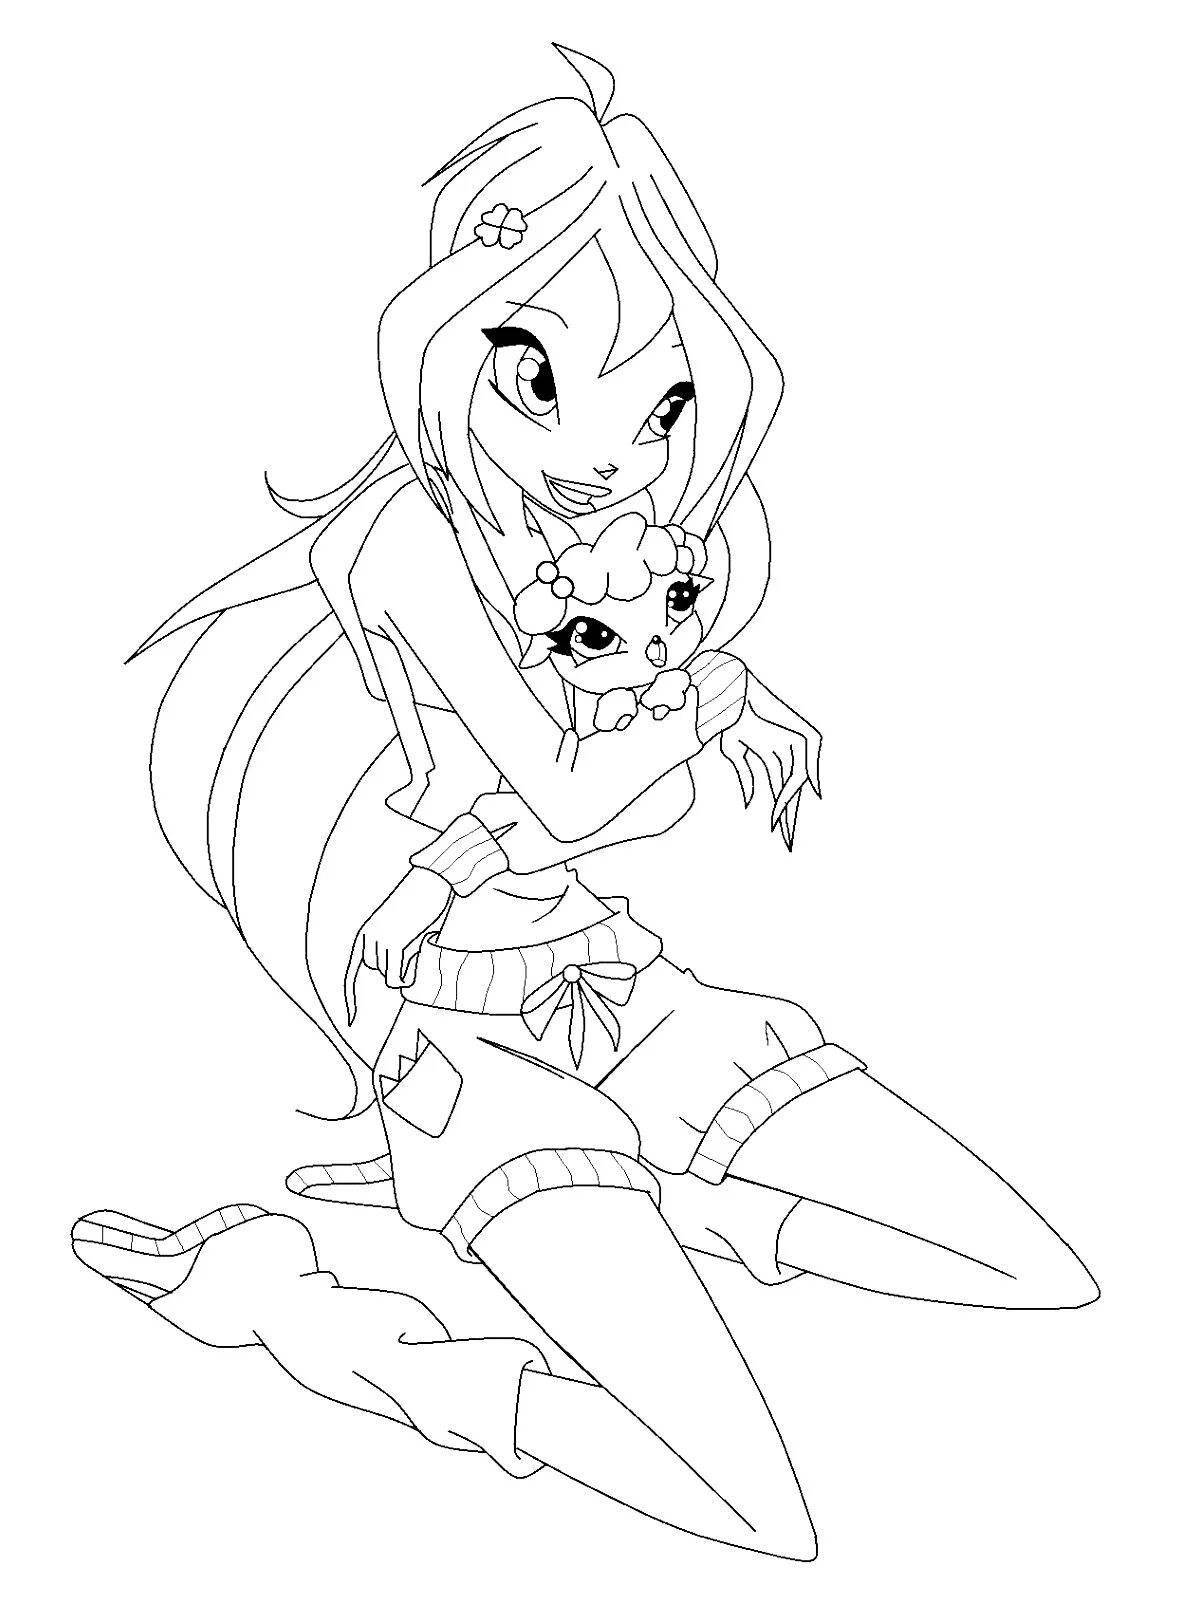 Coloring page dazzling winx pets